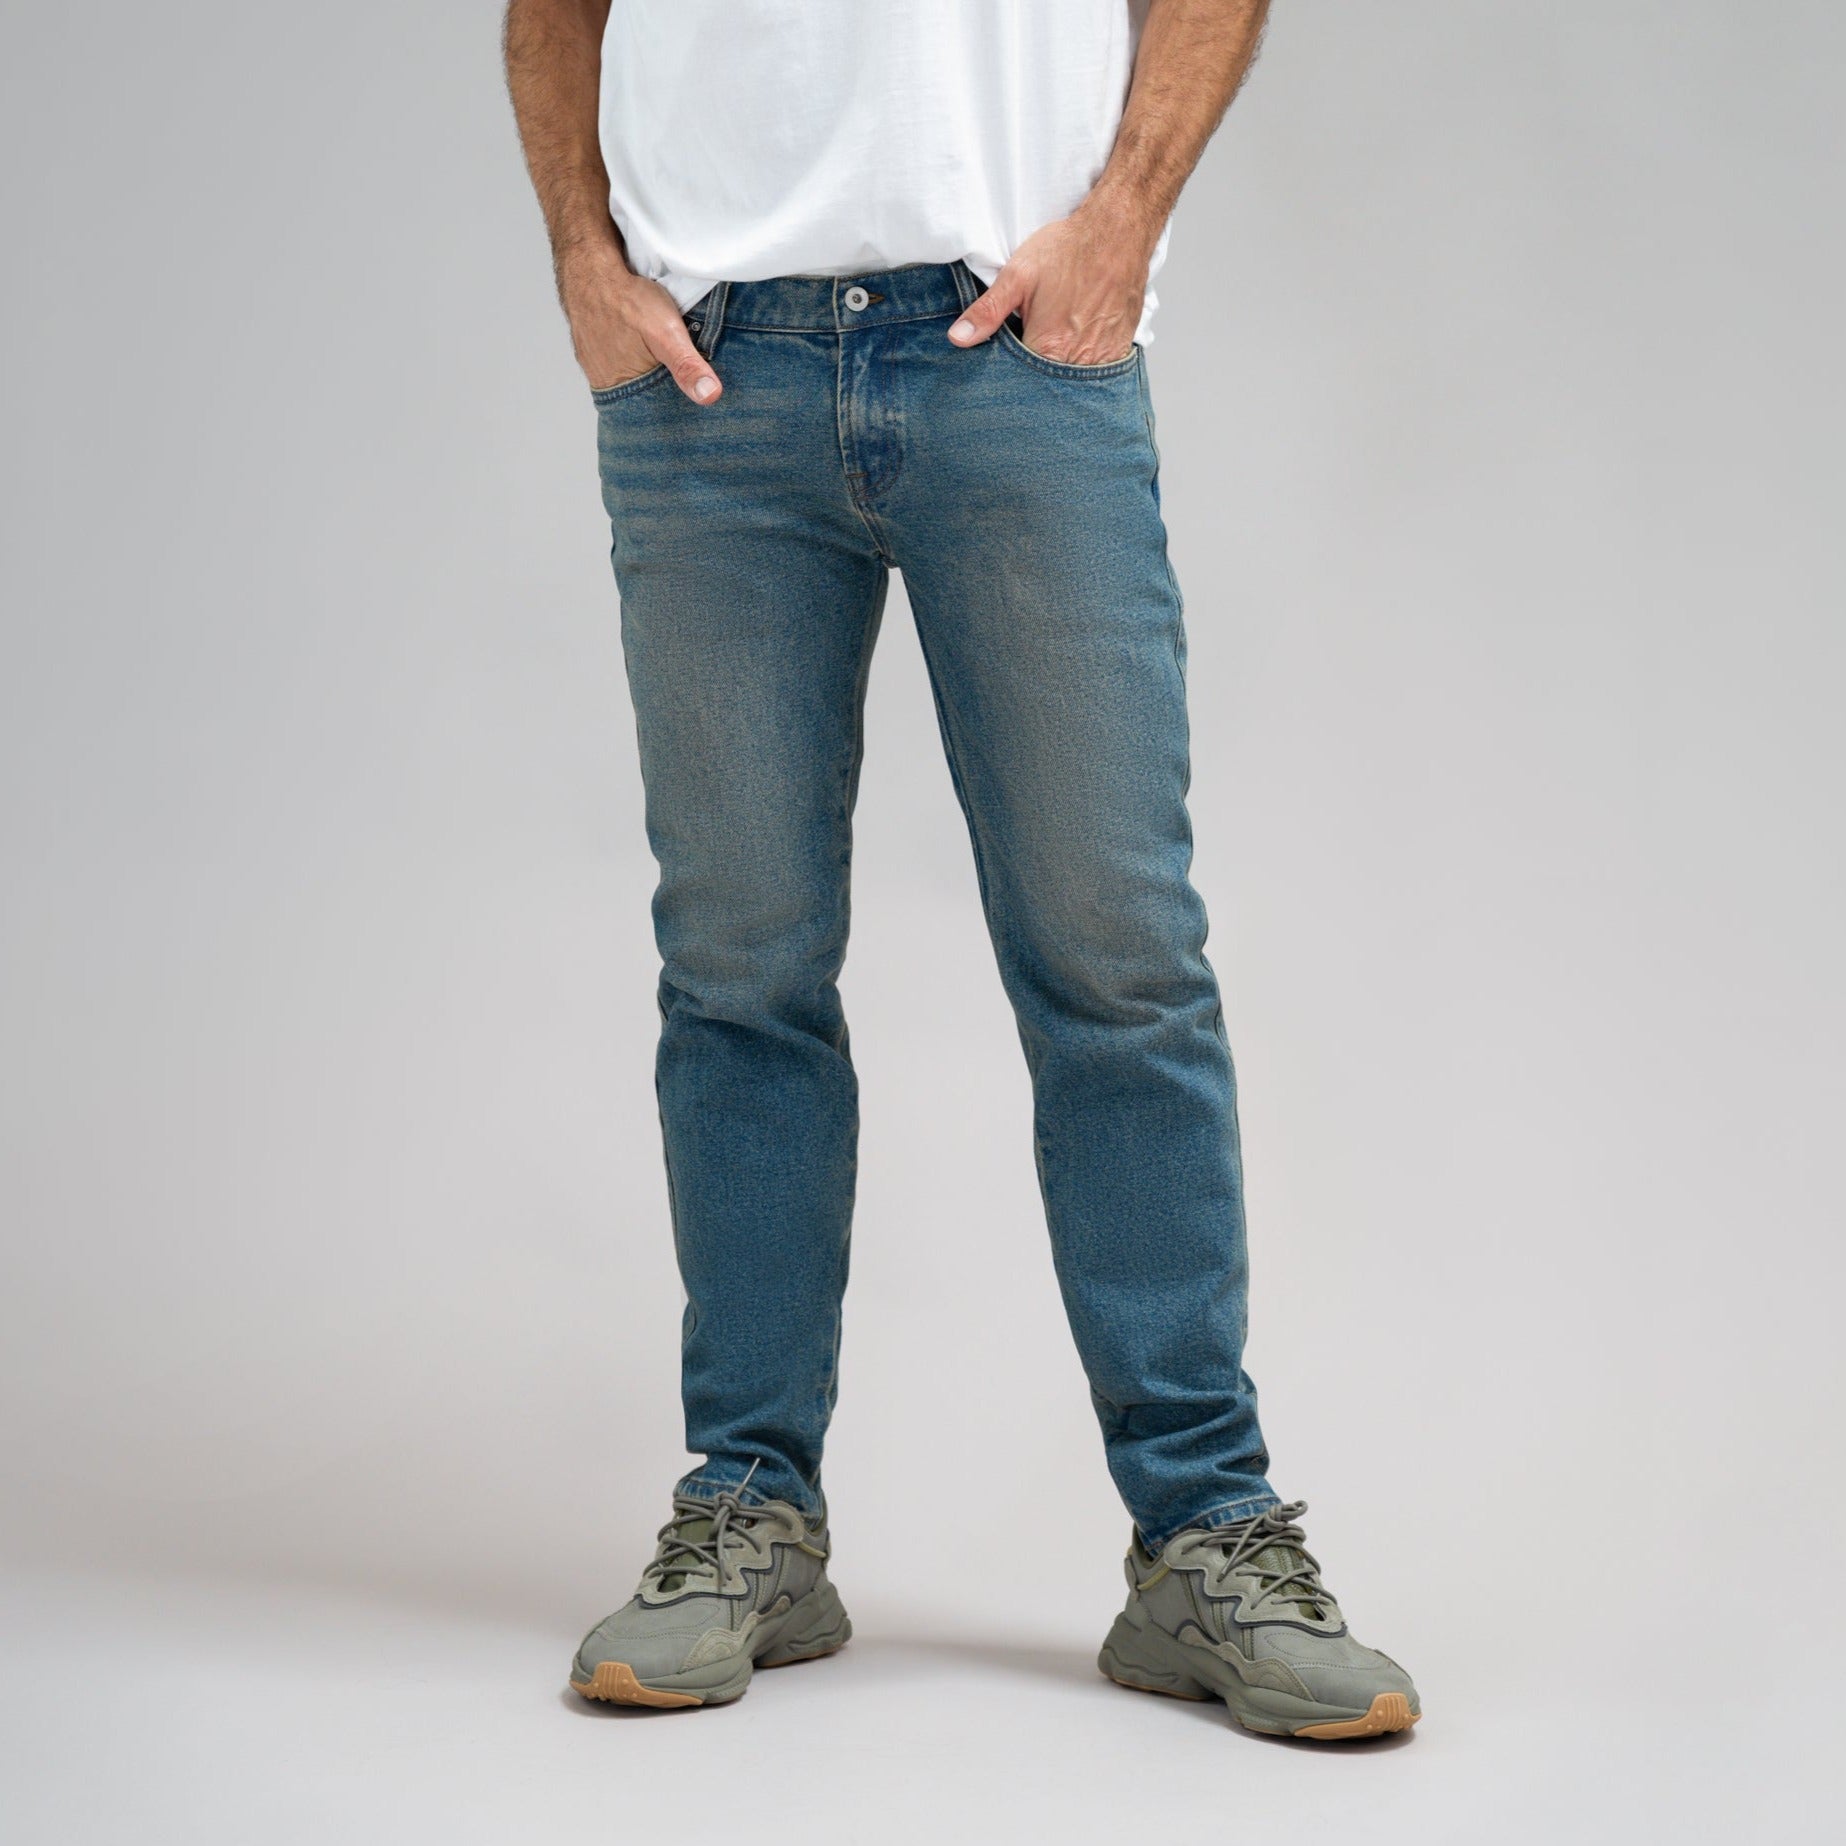 Custom Jeans For Men | True Jeans | Vintage Jeans With Stretch Mens